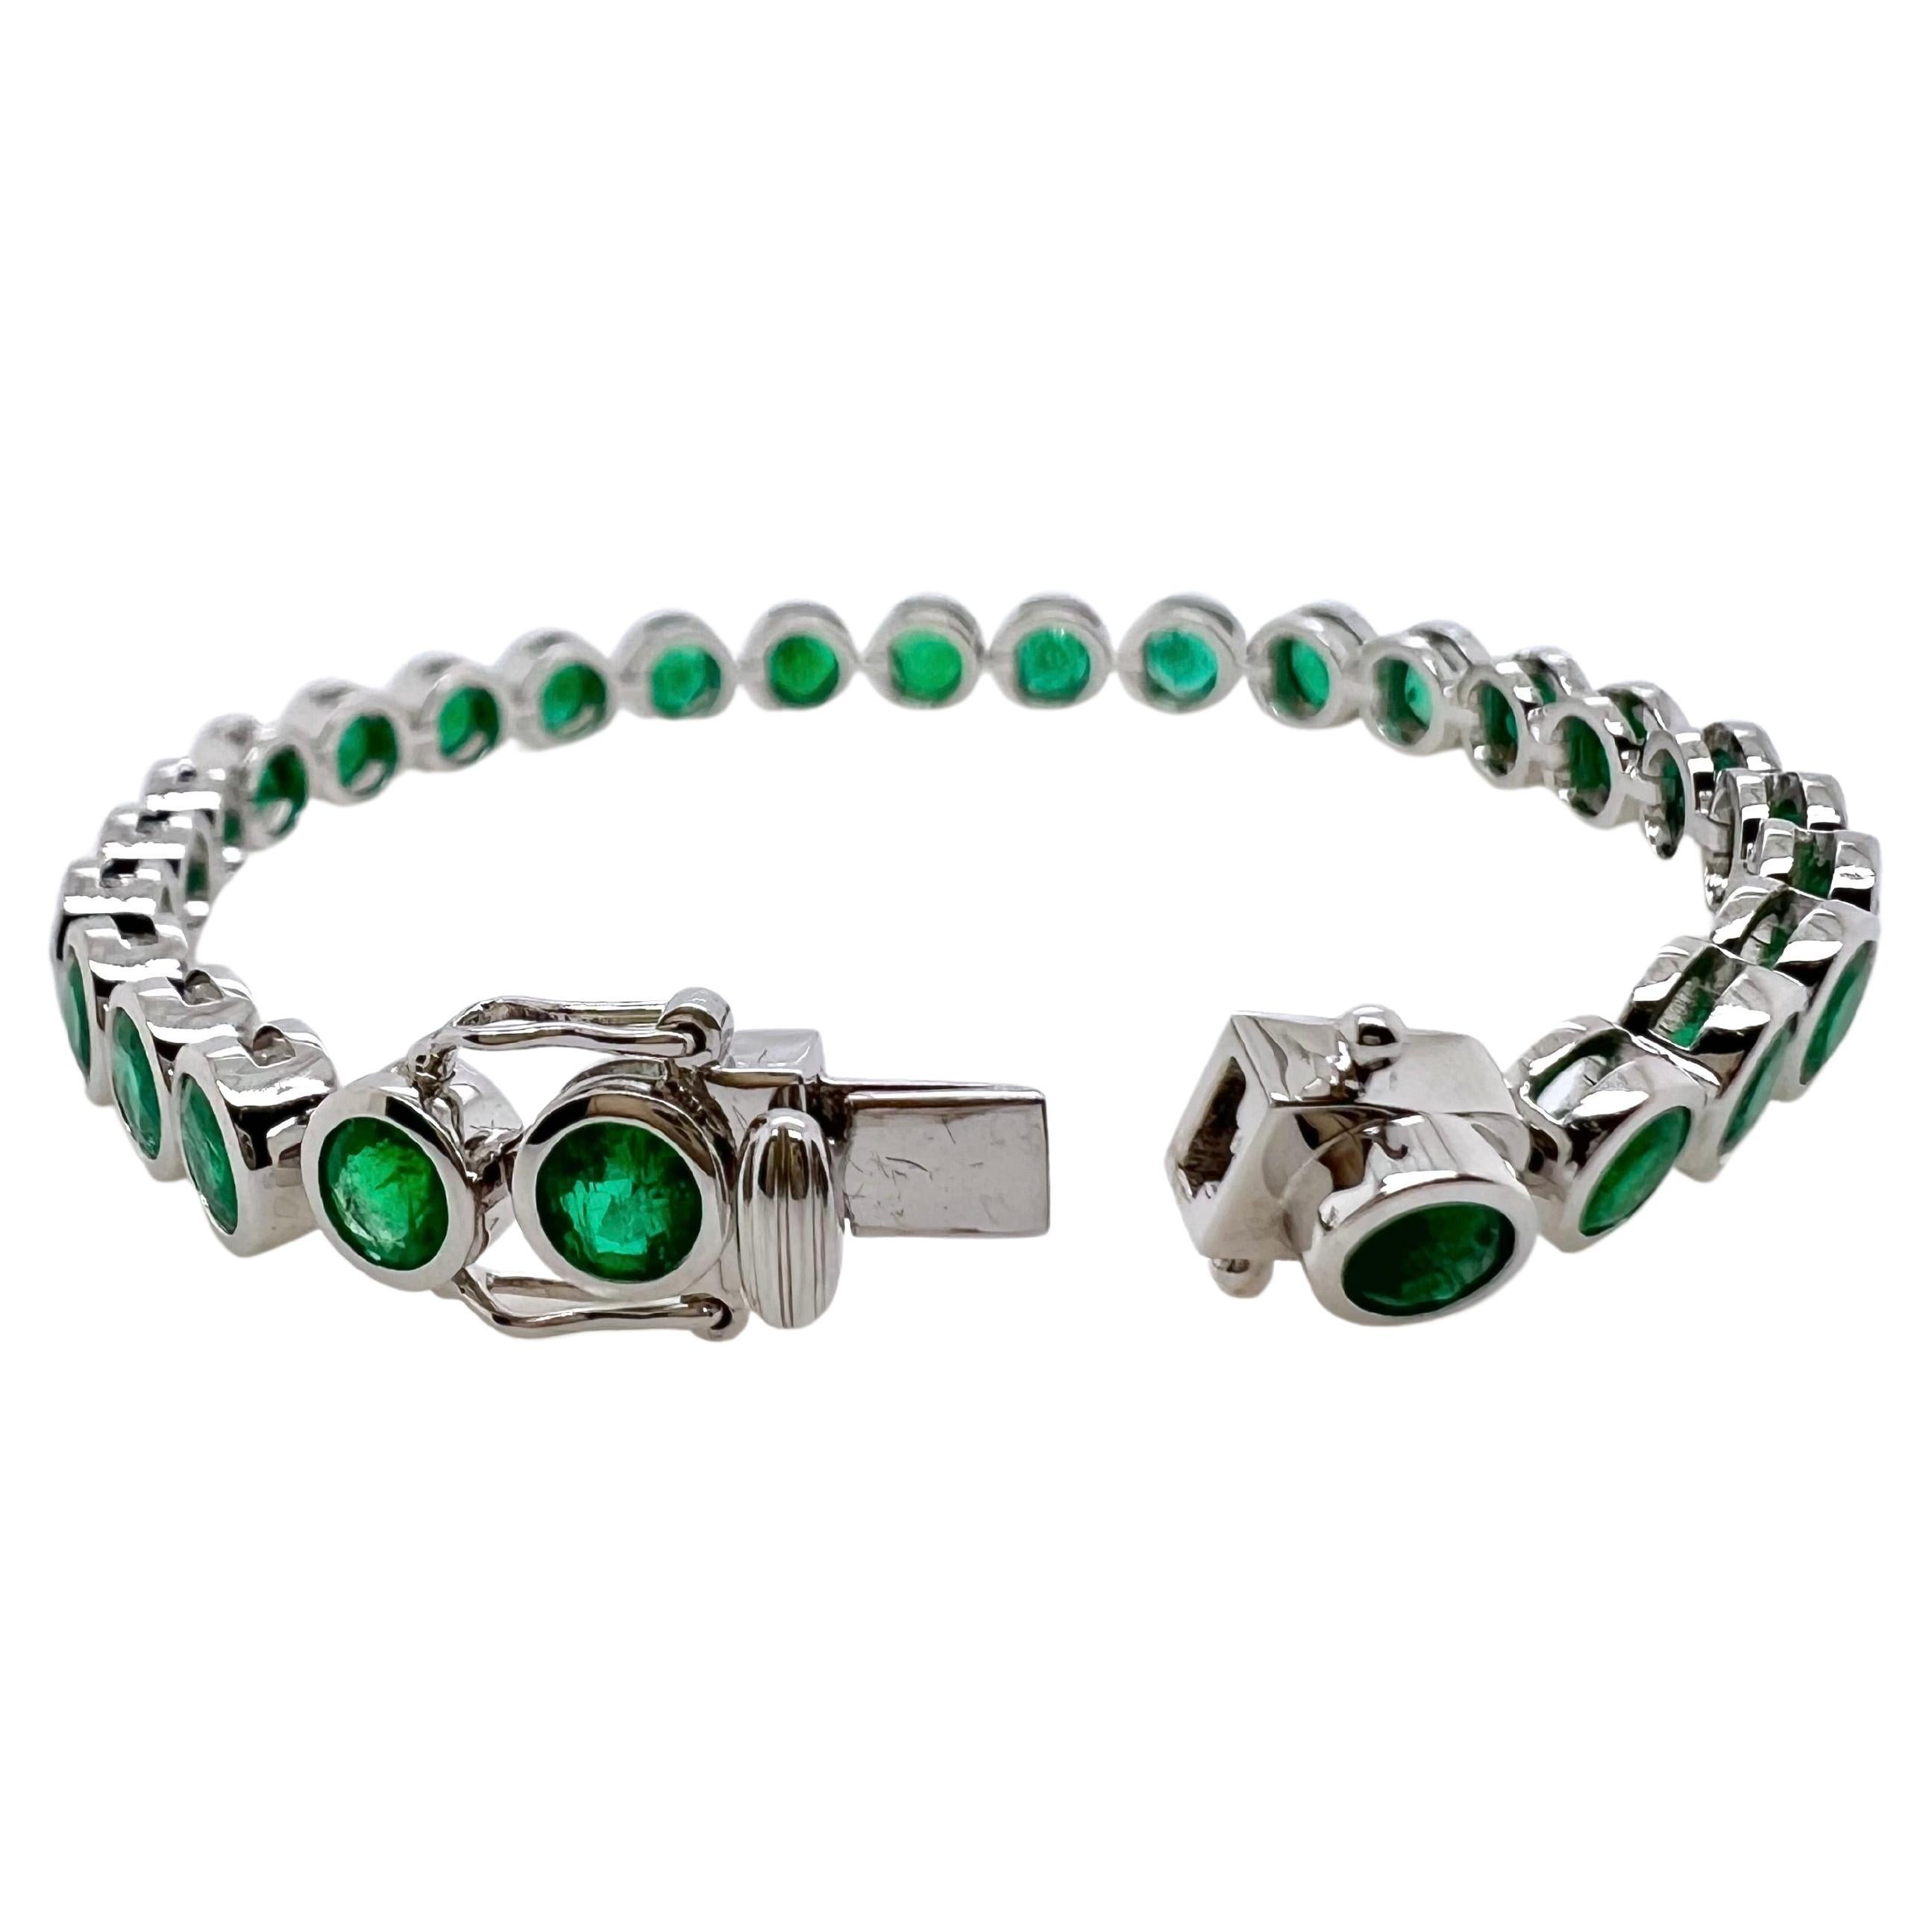 This is not an ordinary bracelet.  The round cut emeralds are bezel set in an 18k white gold mounting that fully exhibits
and emphasizes the emeralds.  Just a straight line of emeralds that can be worn and stacked amongst your other
bracelets or it